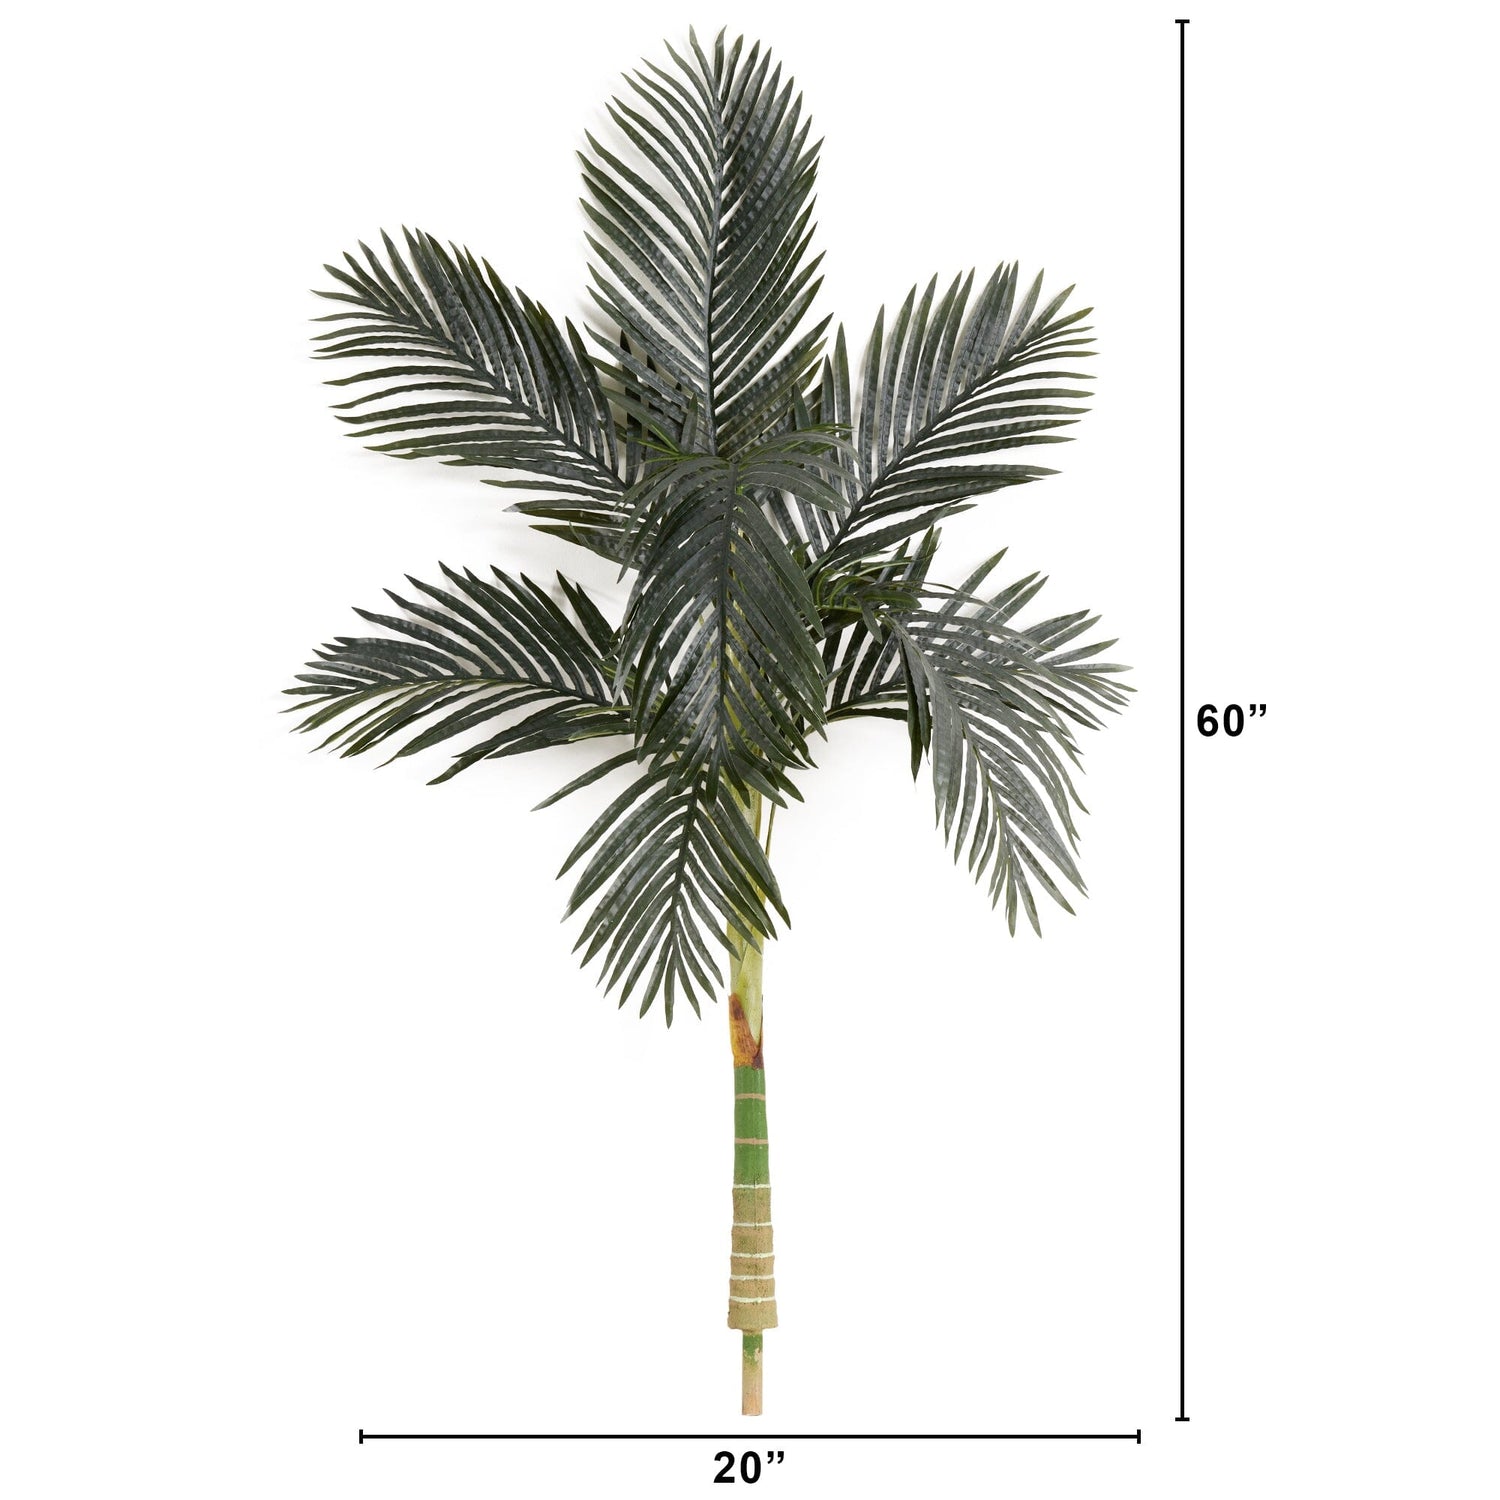 5’ Artificial Golden Cane Palm Tree Without Pot